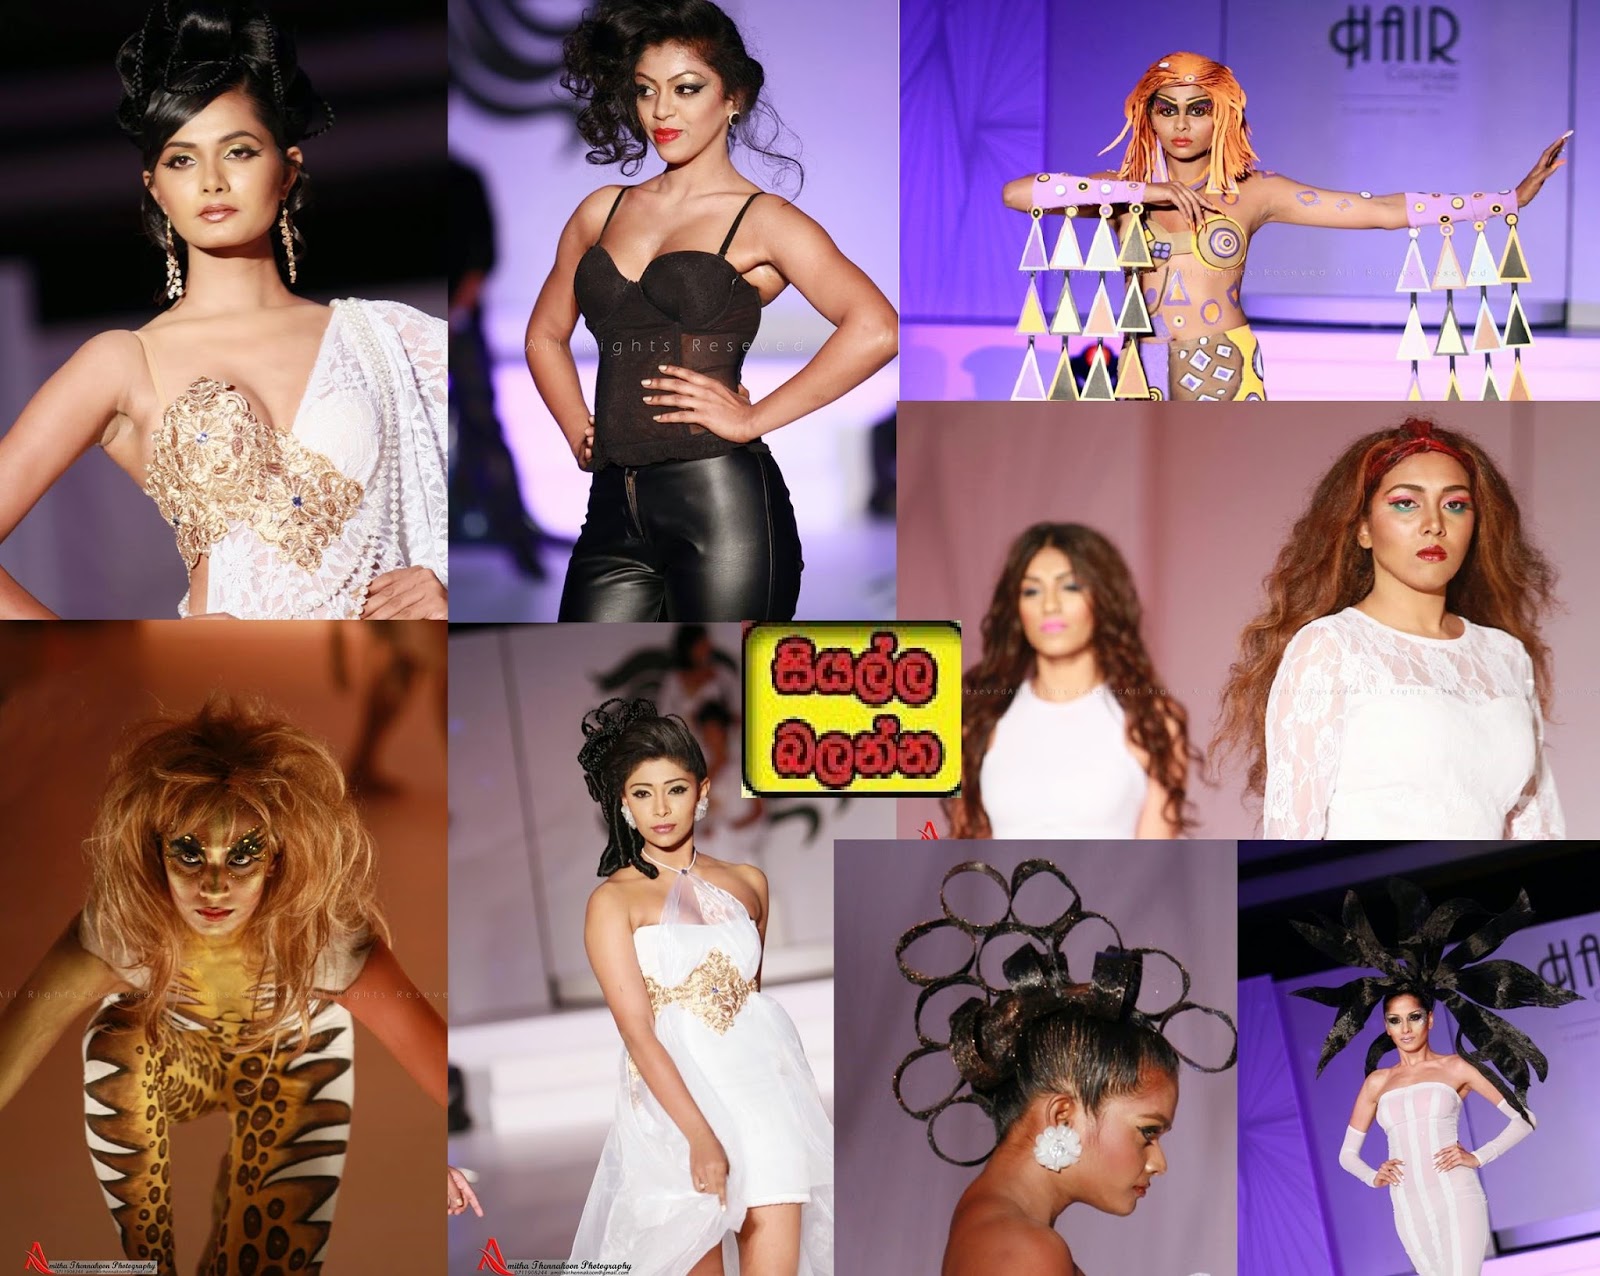 http://picture.gossiplankahotnews.com/2014/10/hair-couture-ramzi-rahaman.html